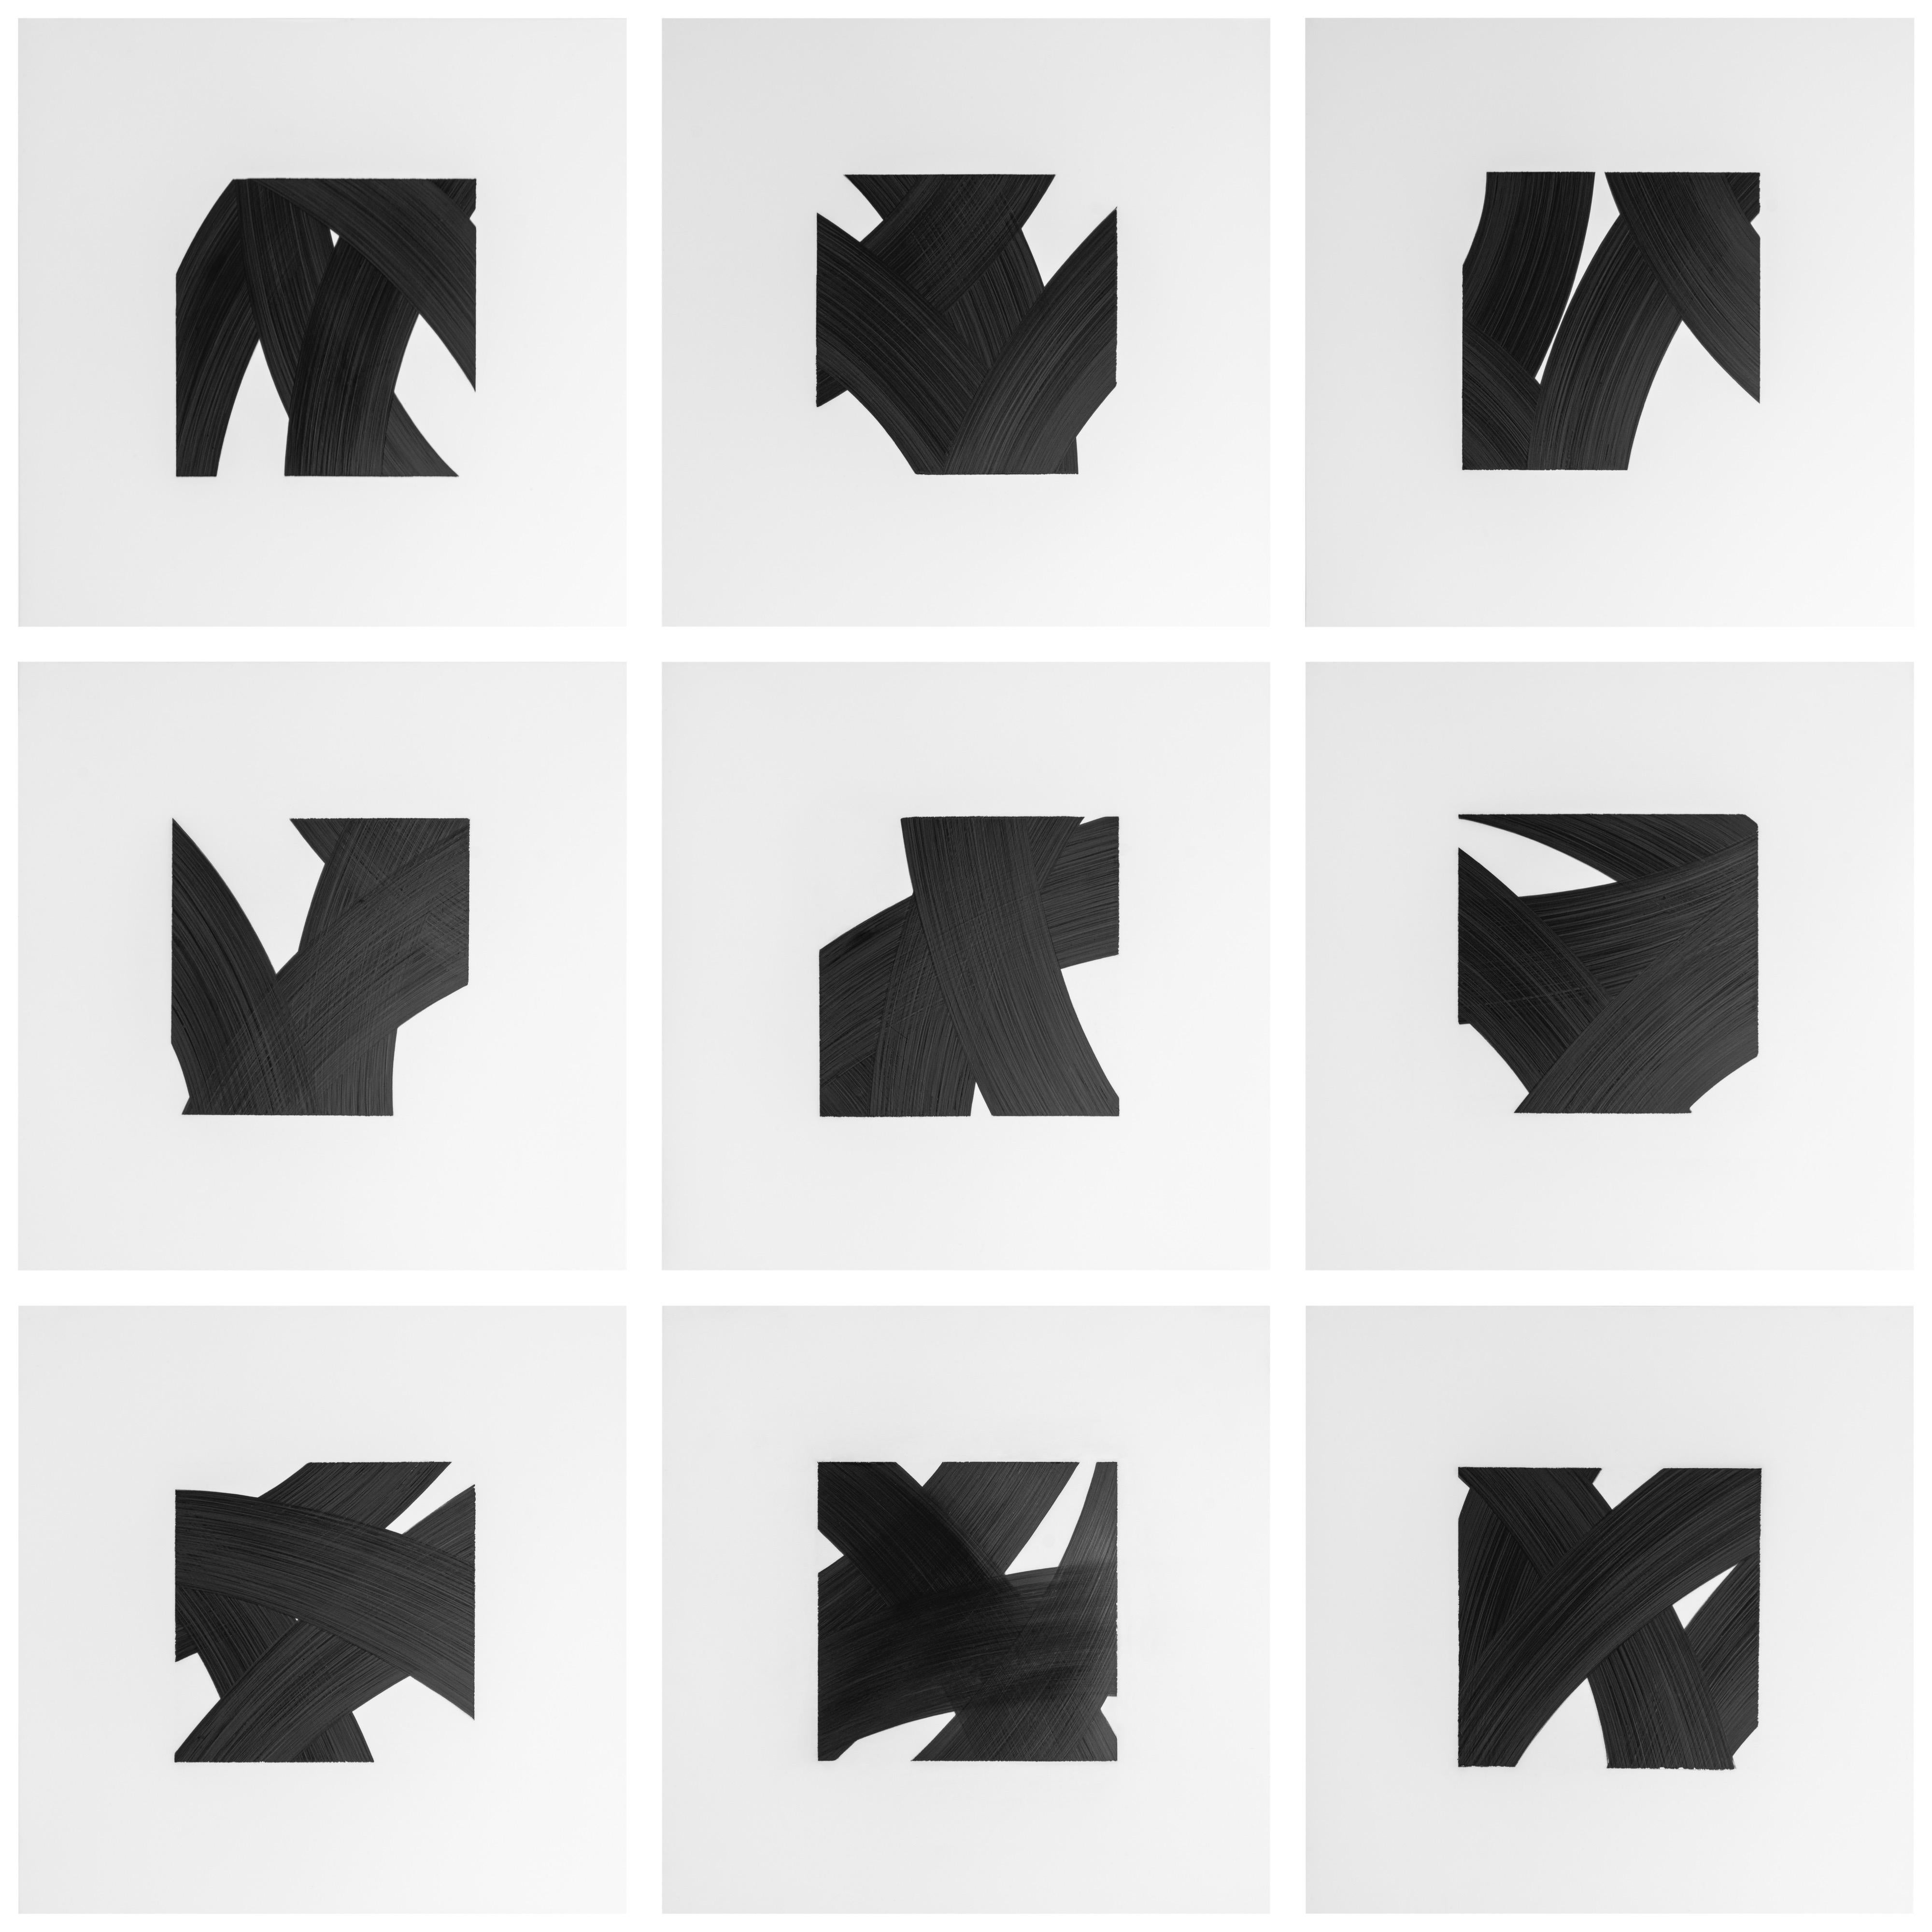 Patrick Carrara Black Ink on Mylar Drawings, Appearance Series, 2016 - 2017 For Sale 5